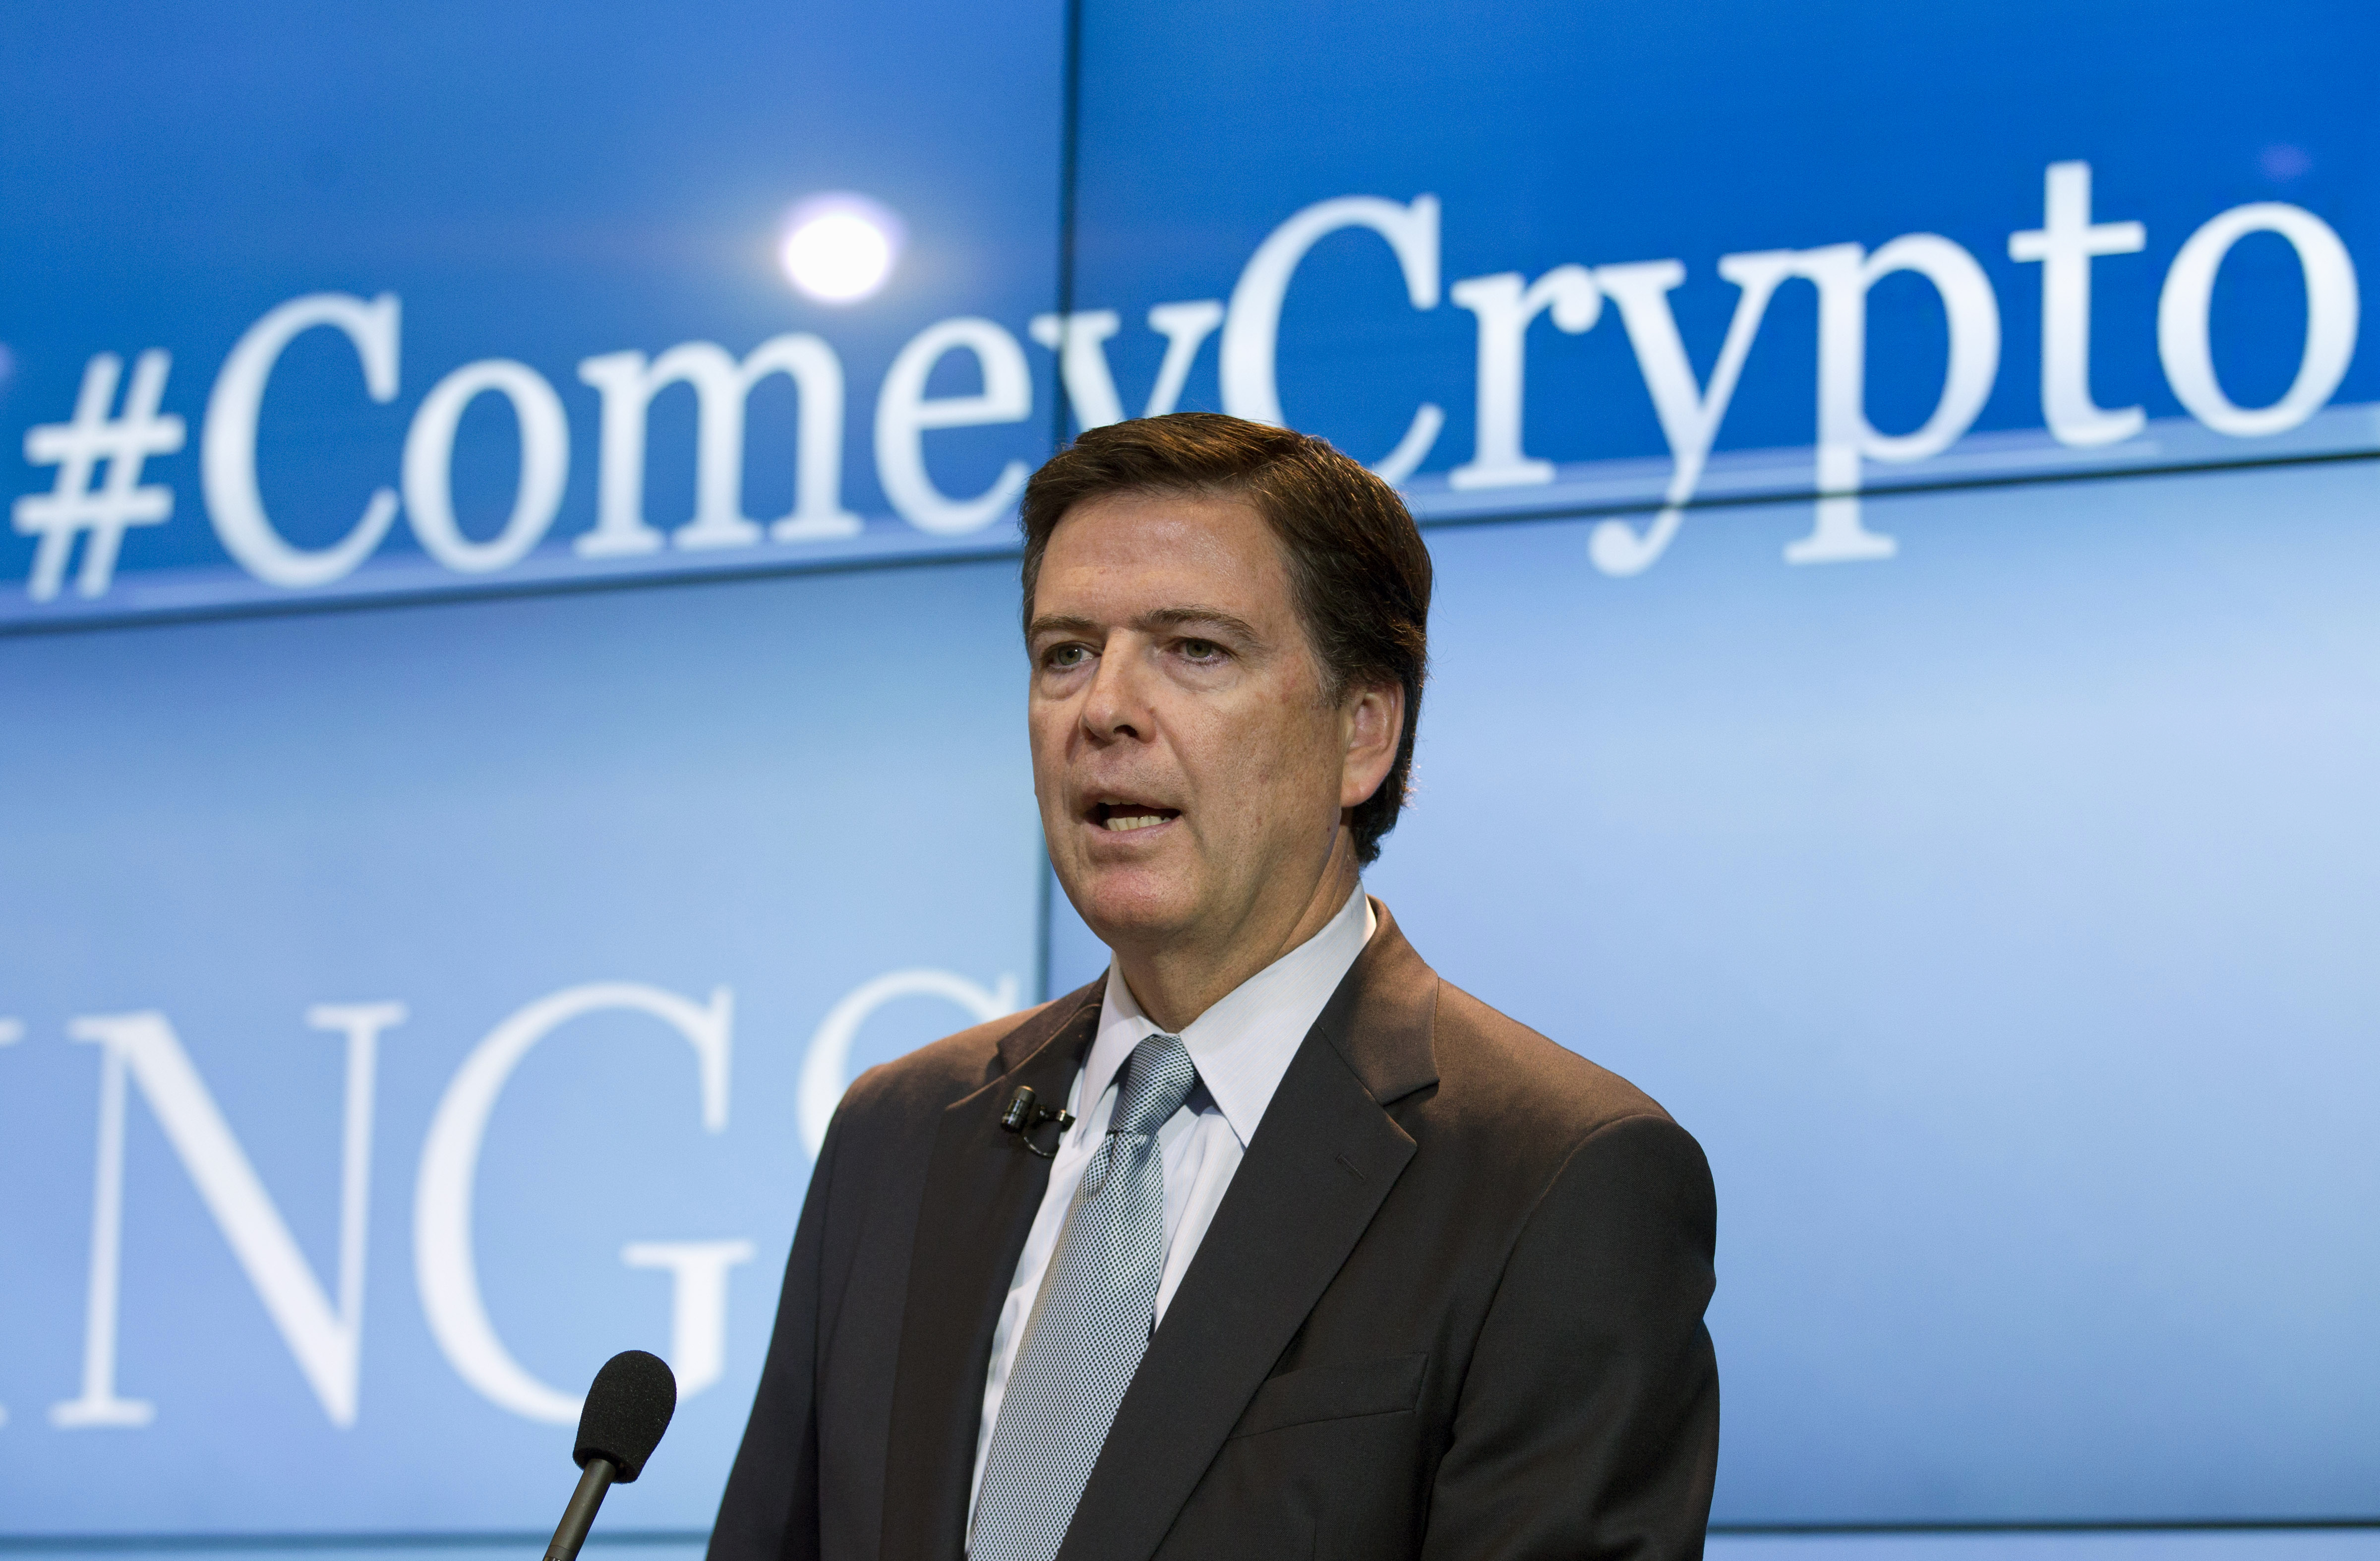 Geek insider, geekinsider, geekinsider. Com,, fbi director thinks you're too secure, news